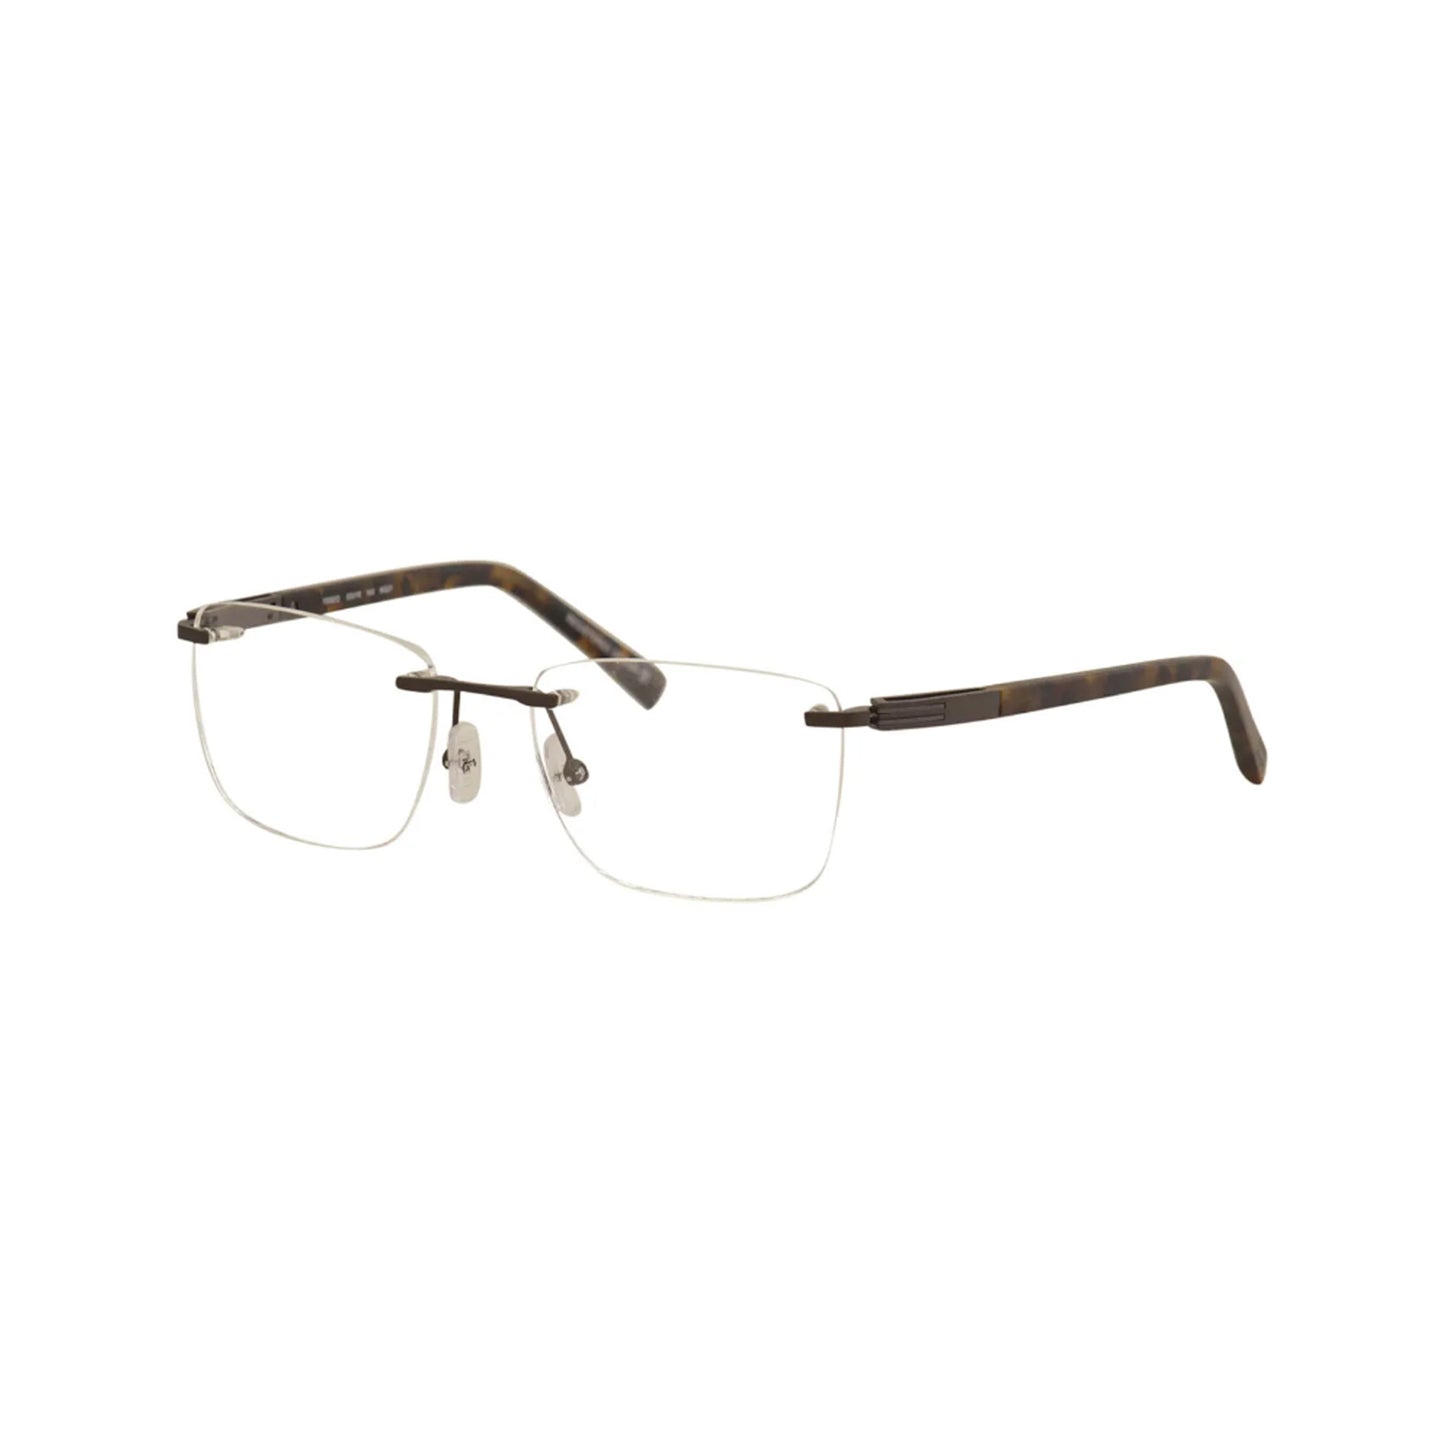 Oga By Morel Brown Square Acetate Rimless Eyeglasses. Made in France. 100920-Y22 MG21